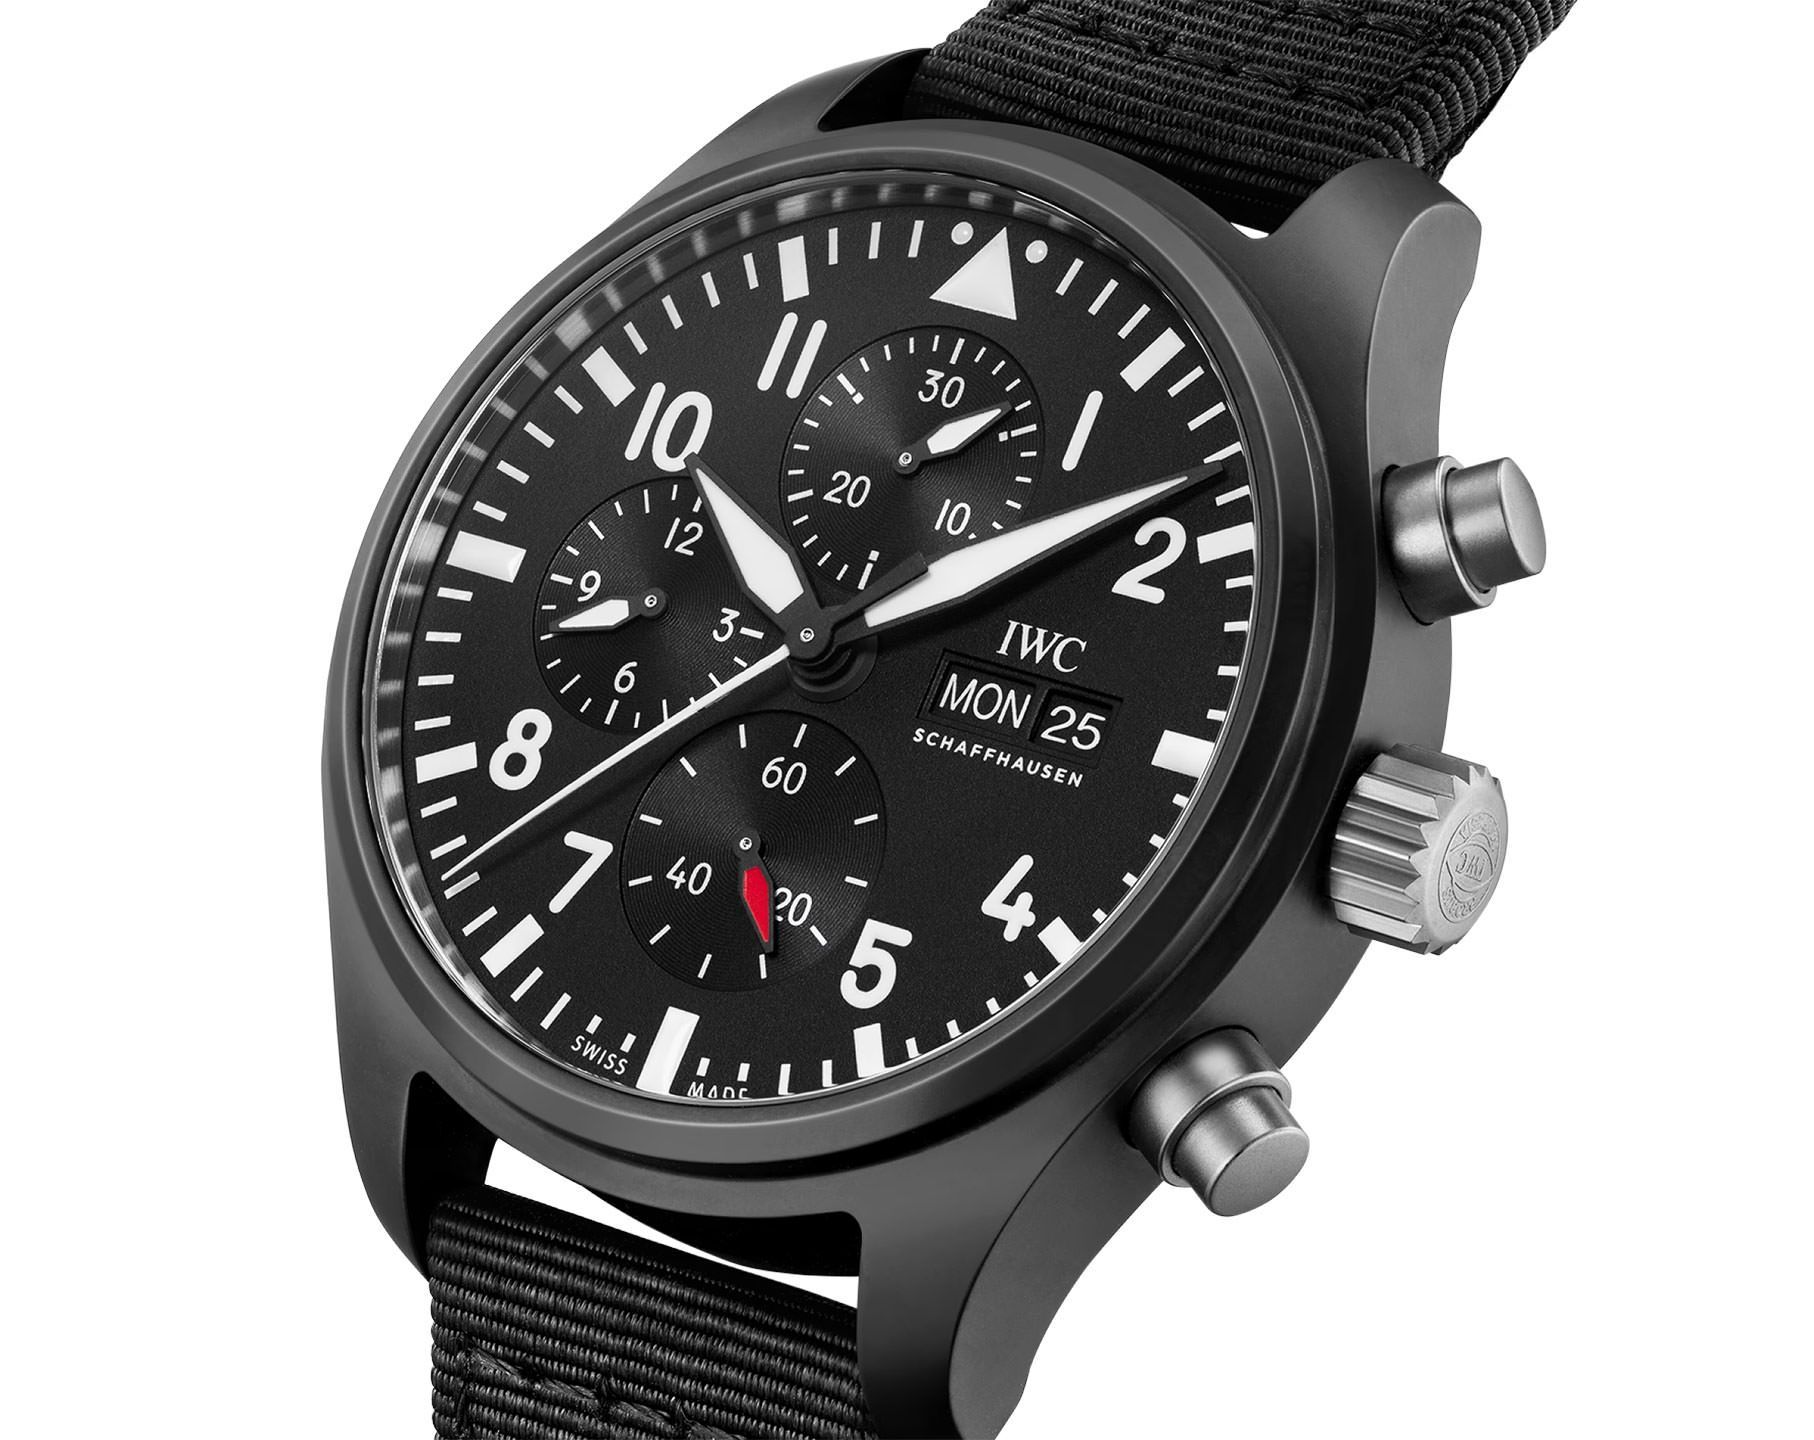 IWC Performance Materials 44.5 mm Watch in Black Dial For Men - 4